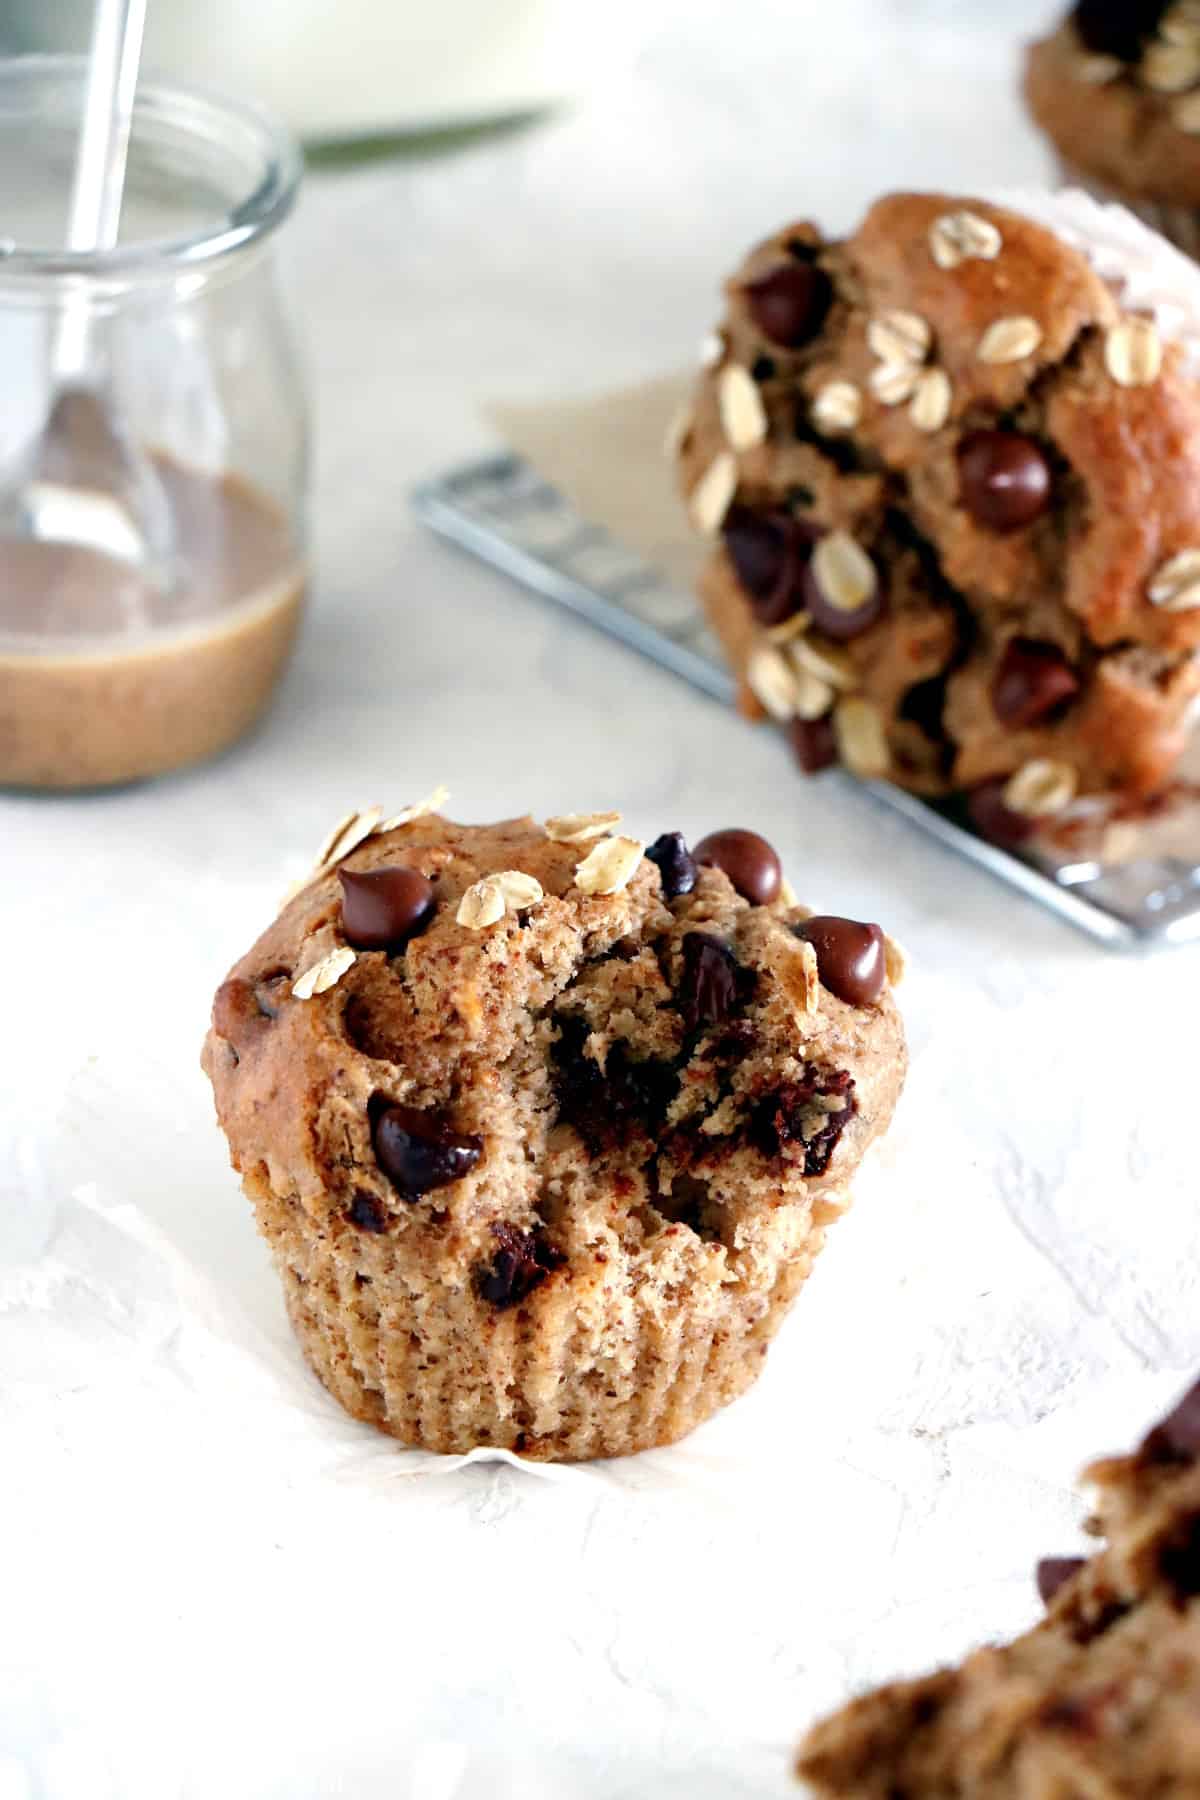 These sugar-free almond butter banana muffins are on the healthy side. They are made with nutritious, wholesome ingredients and packed with fiber.